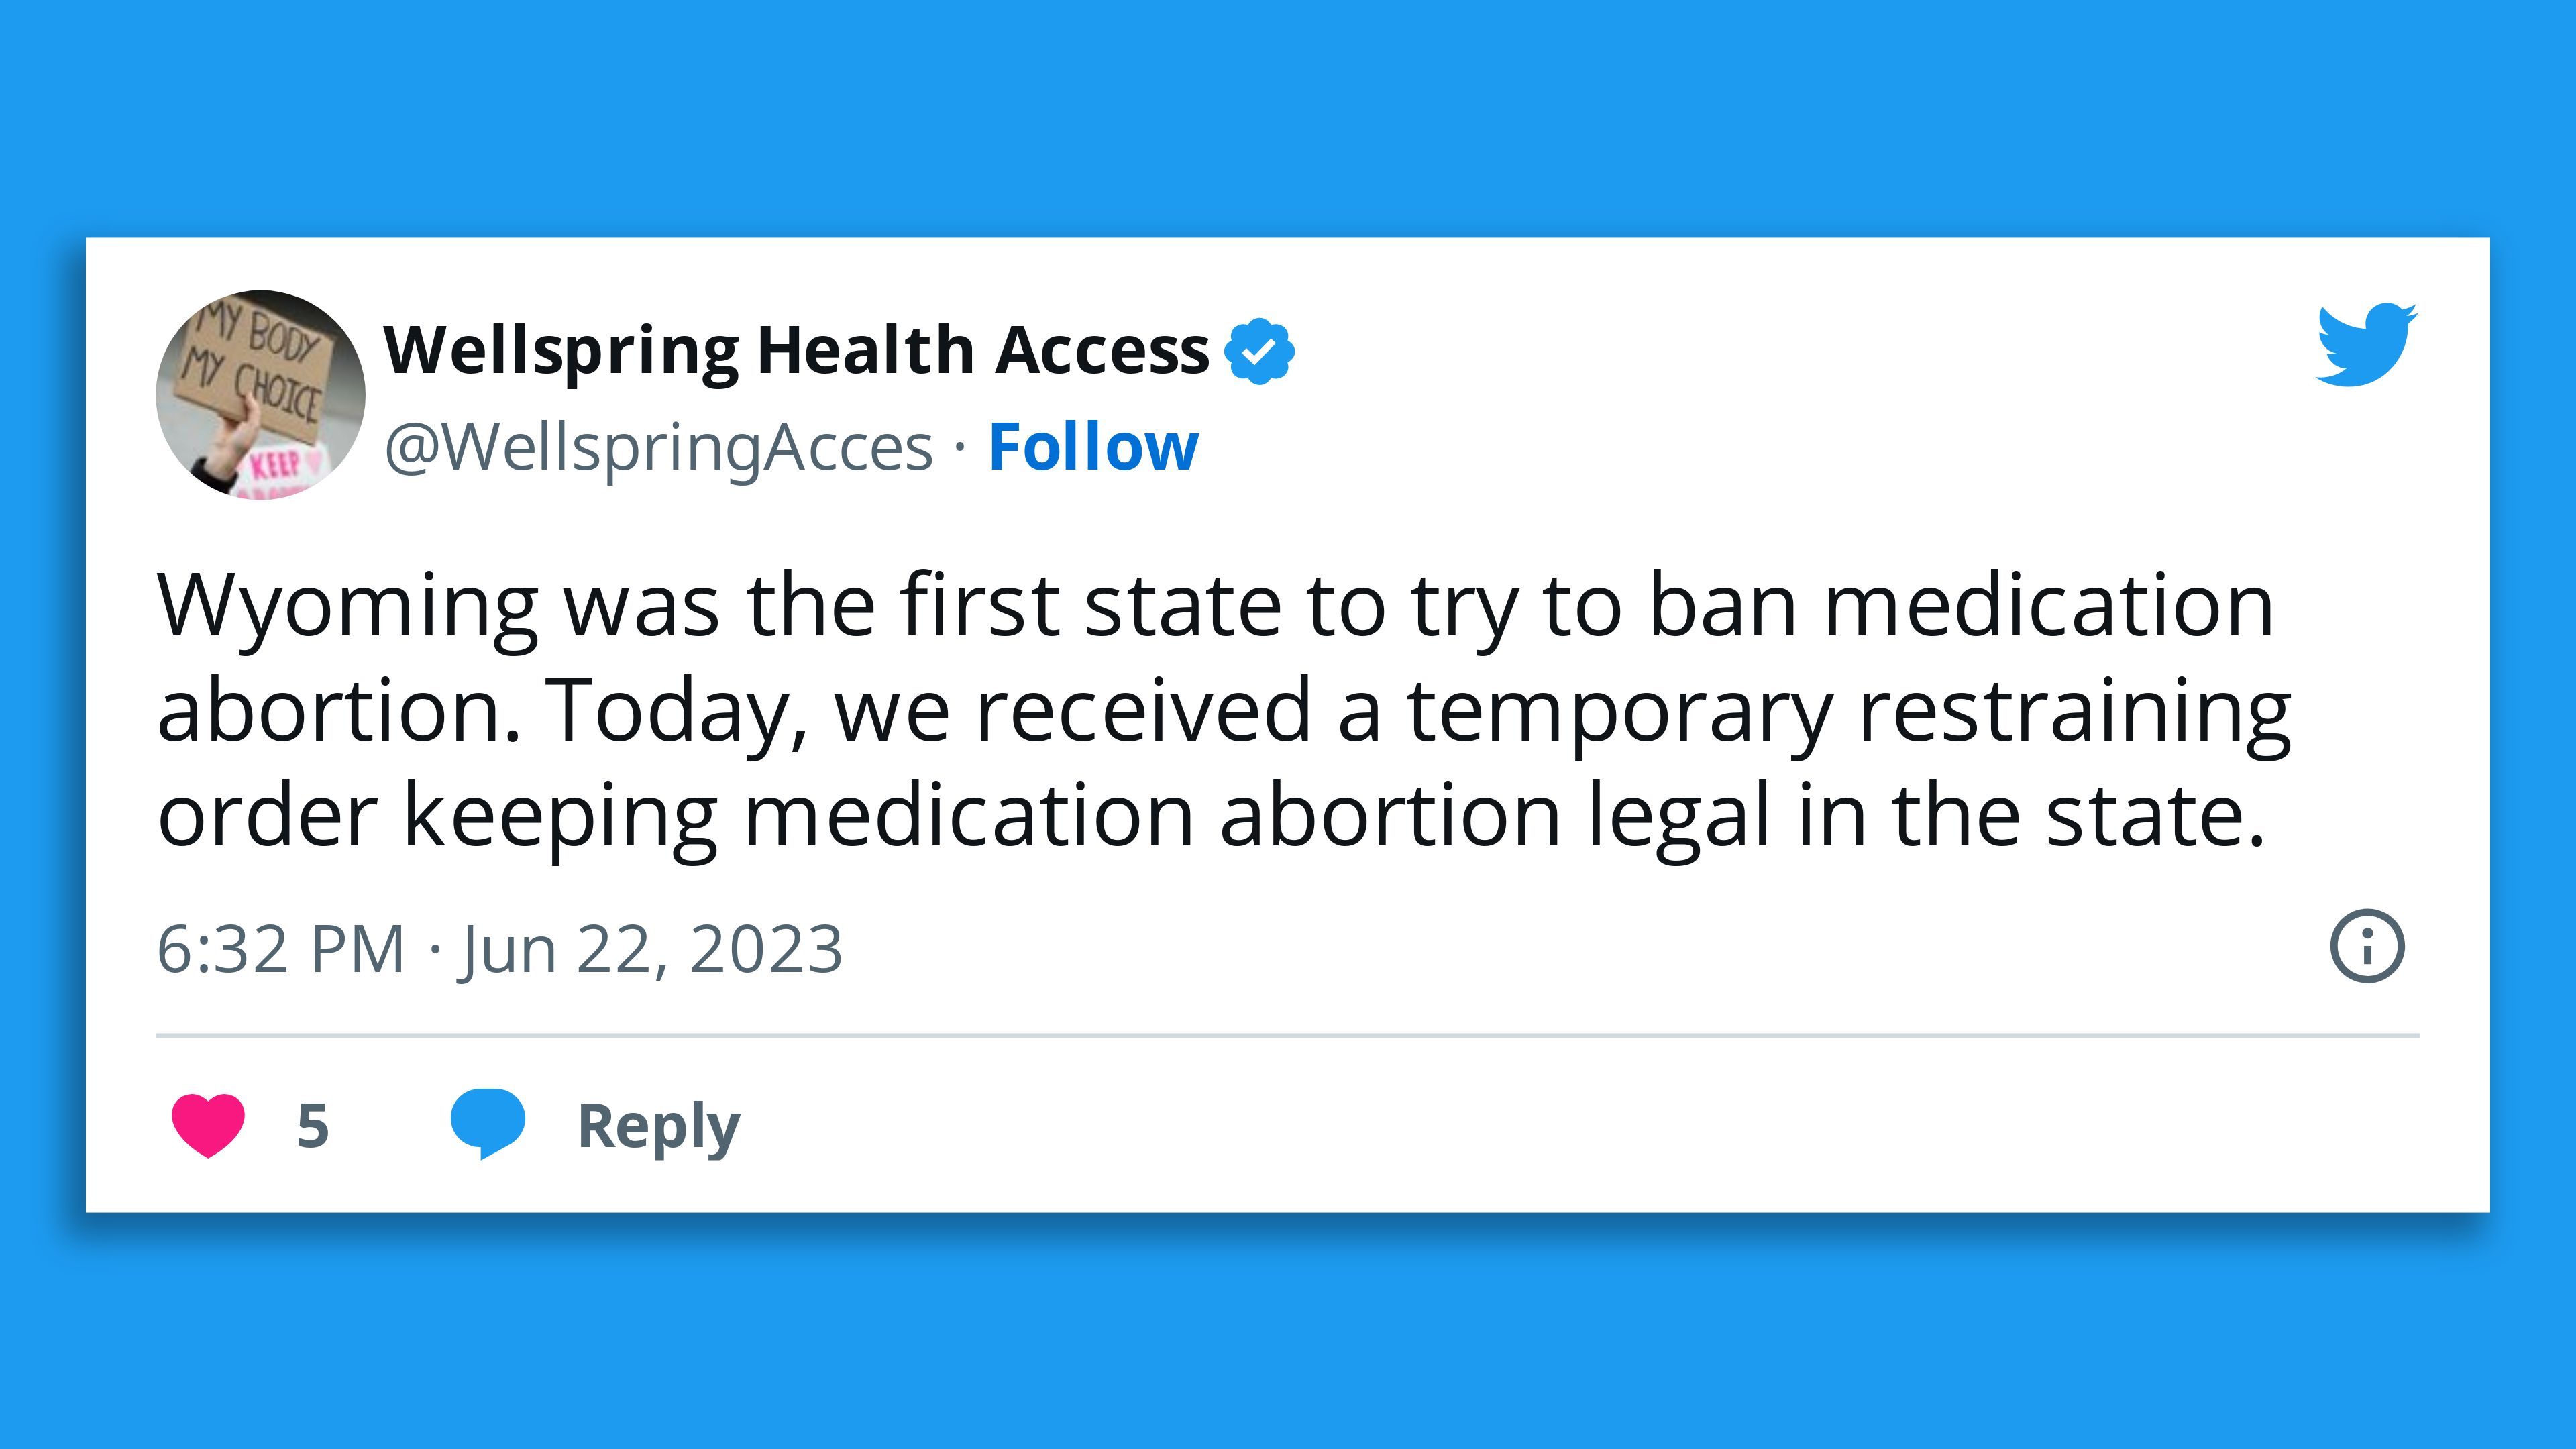 A tweet by abortion clinic Wellspring Health Access, saying: "Wyoming was the first state to try to ban medication abortion. Today, we received a temporary restraining order keeping medication abortion legal in the state."